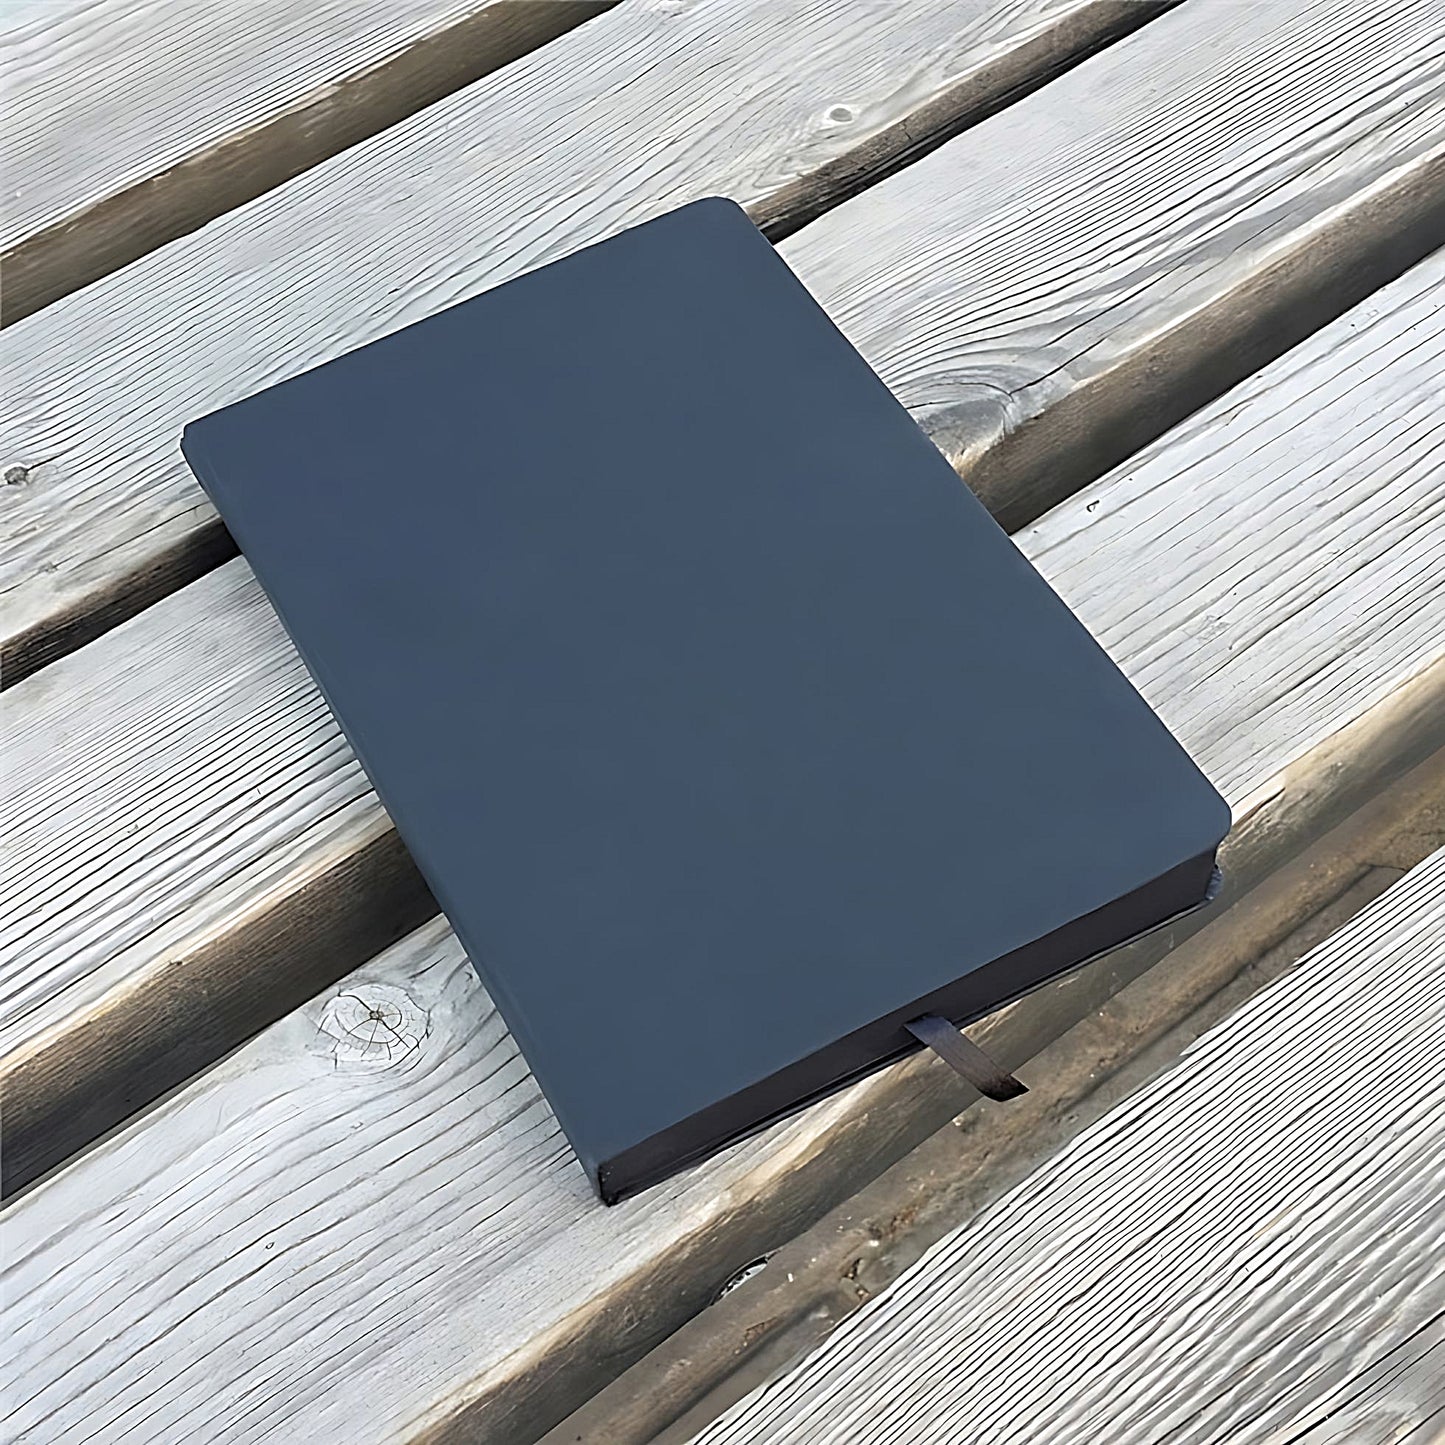 a black notebook on a wooden surface